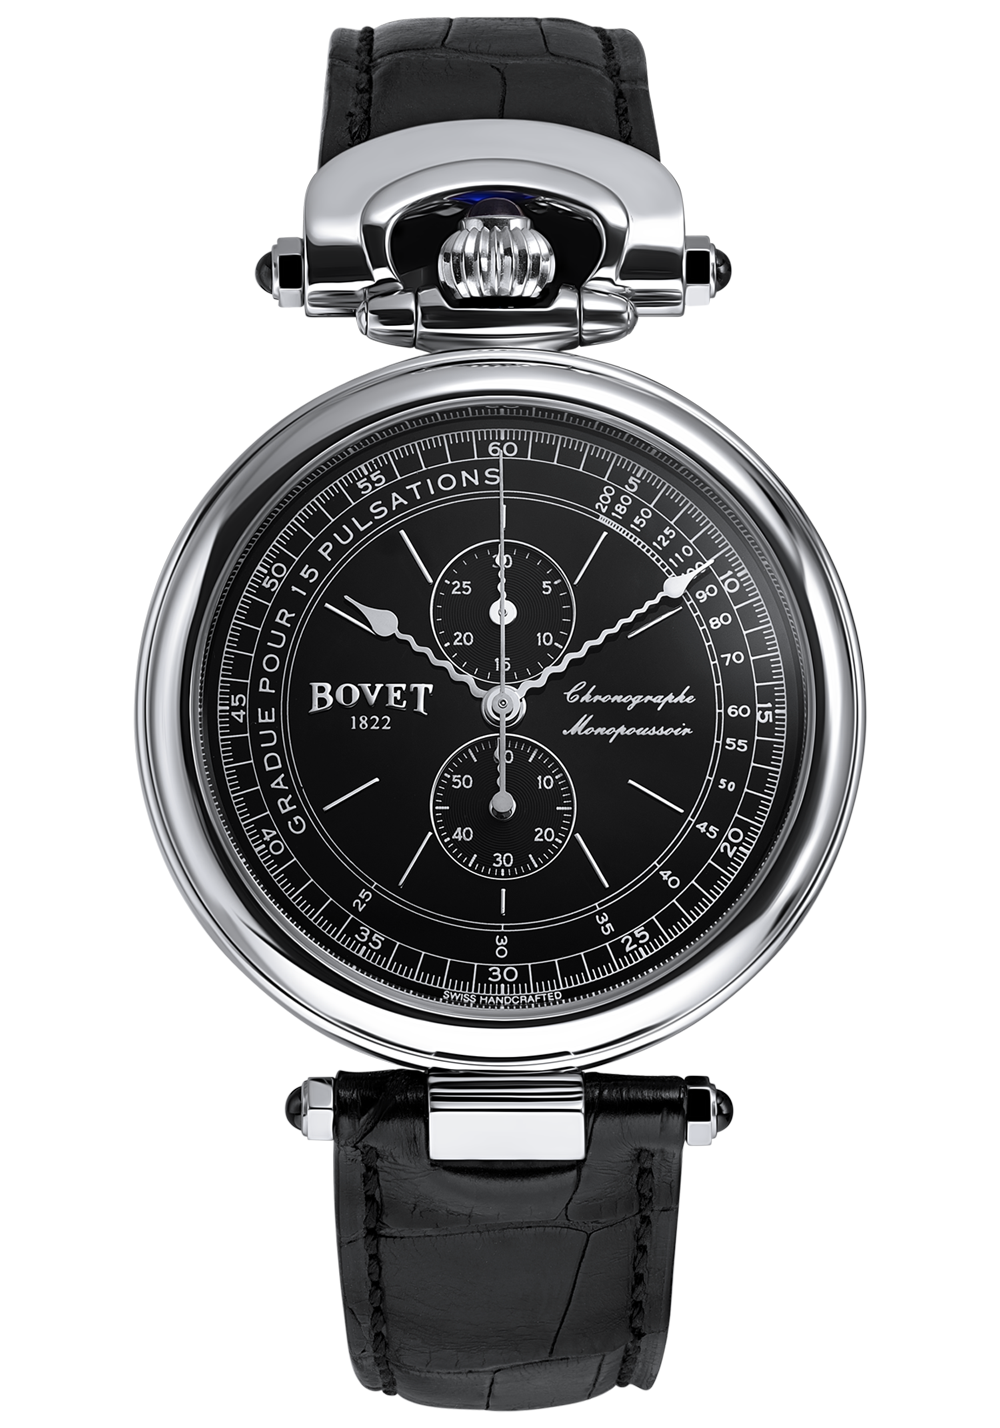 Bovet Amadeo Fleurier Complications Chronograph Monopusher CP0256 